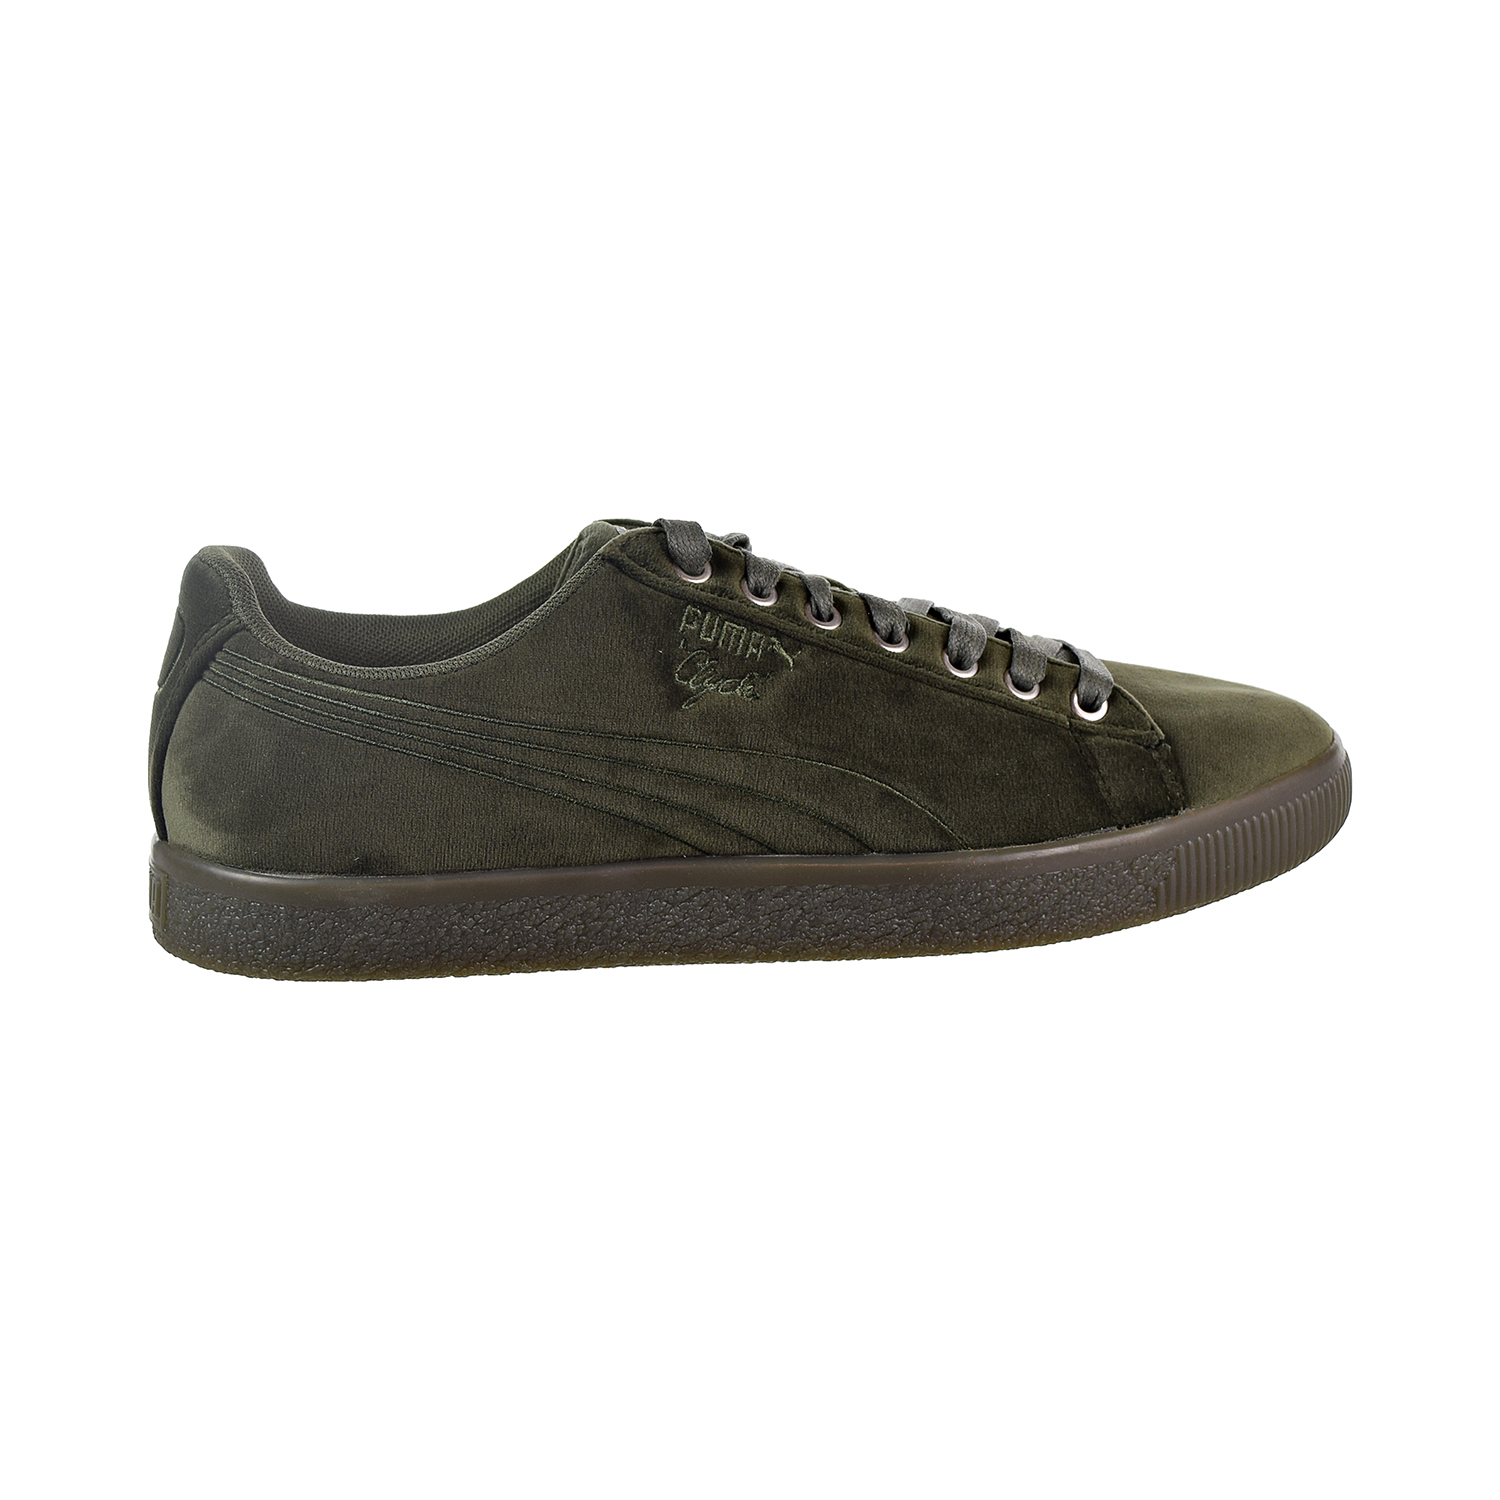 Puma clyde Velour Ice Men's Shoes Olive 